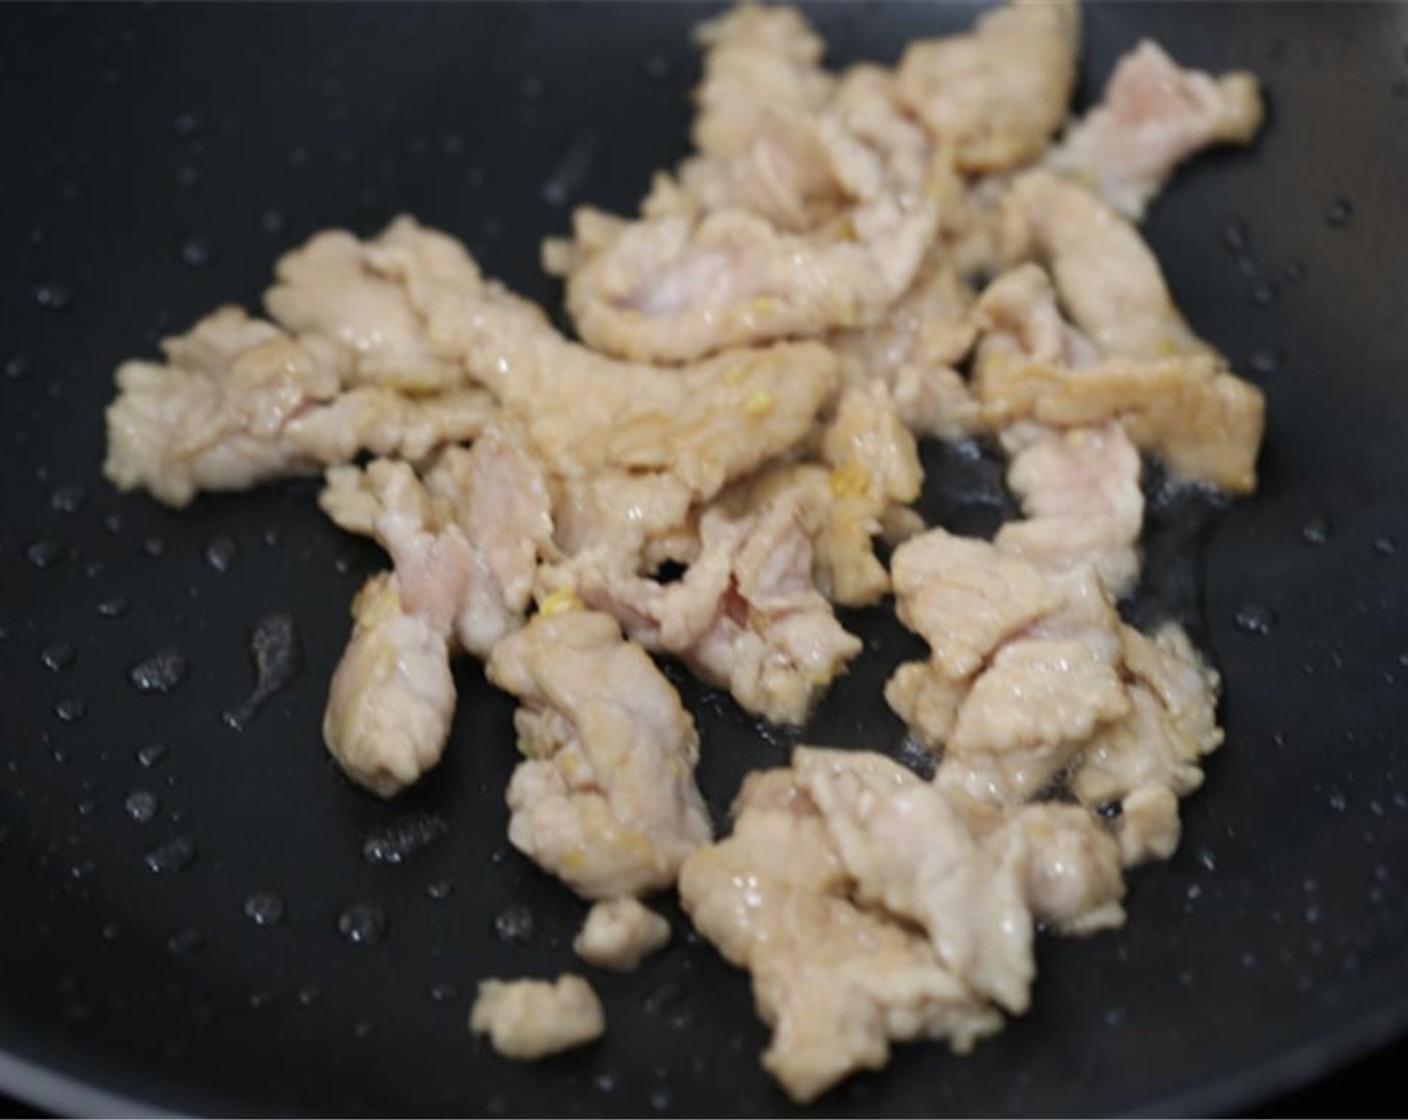 step 5 Heat your wok or pan firstly. Add Cooking Oil (3 Tbsp). Spread the pork slices in when the oil begins to warm but not hot. Let them stay for around 5-8 seconds and then quickly fry them until turns pale. Transfer out immediately.